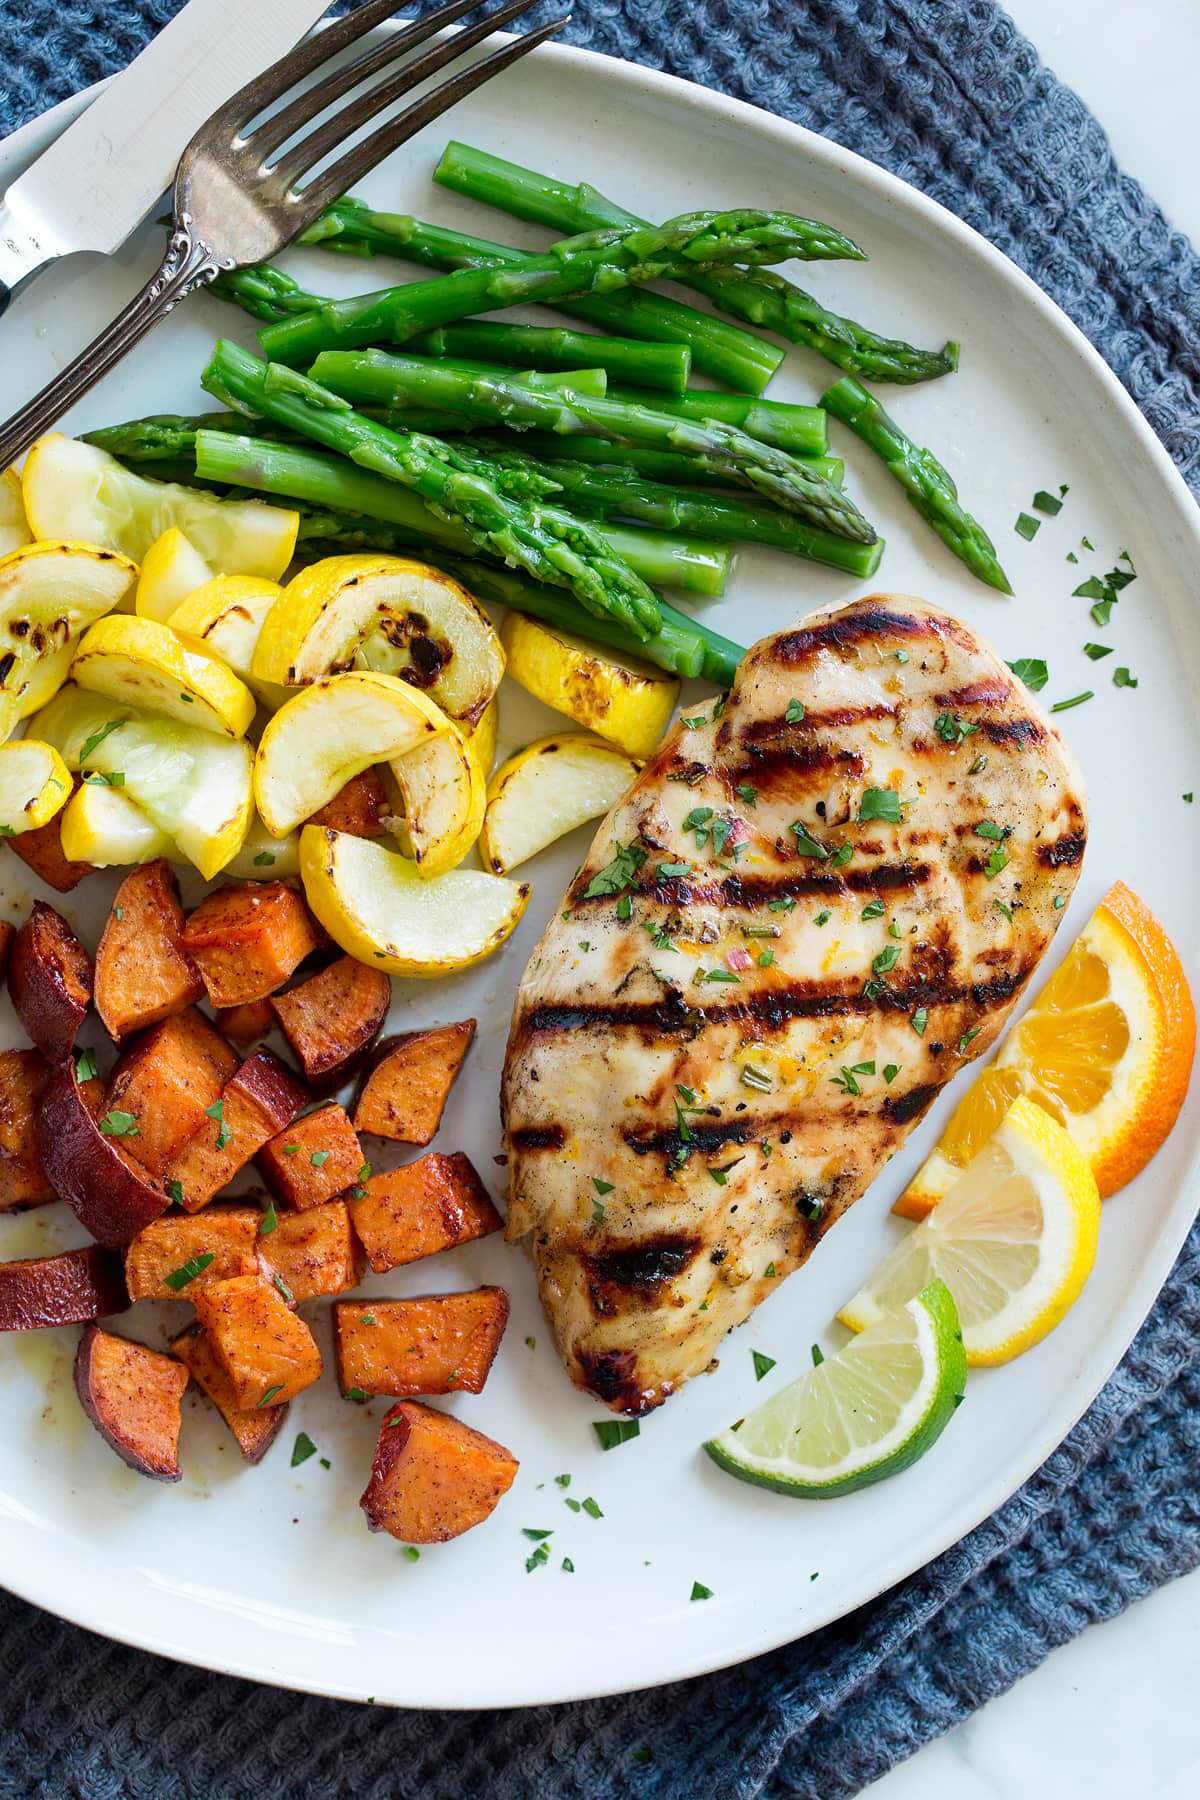 Marinated chicken on a serving plate with a side of asparagus, yellow squash, sweet potatoes and citrus slices.